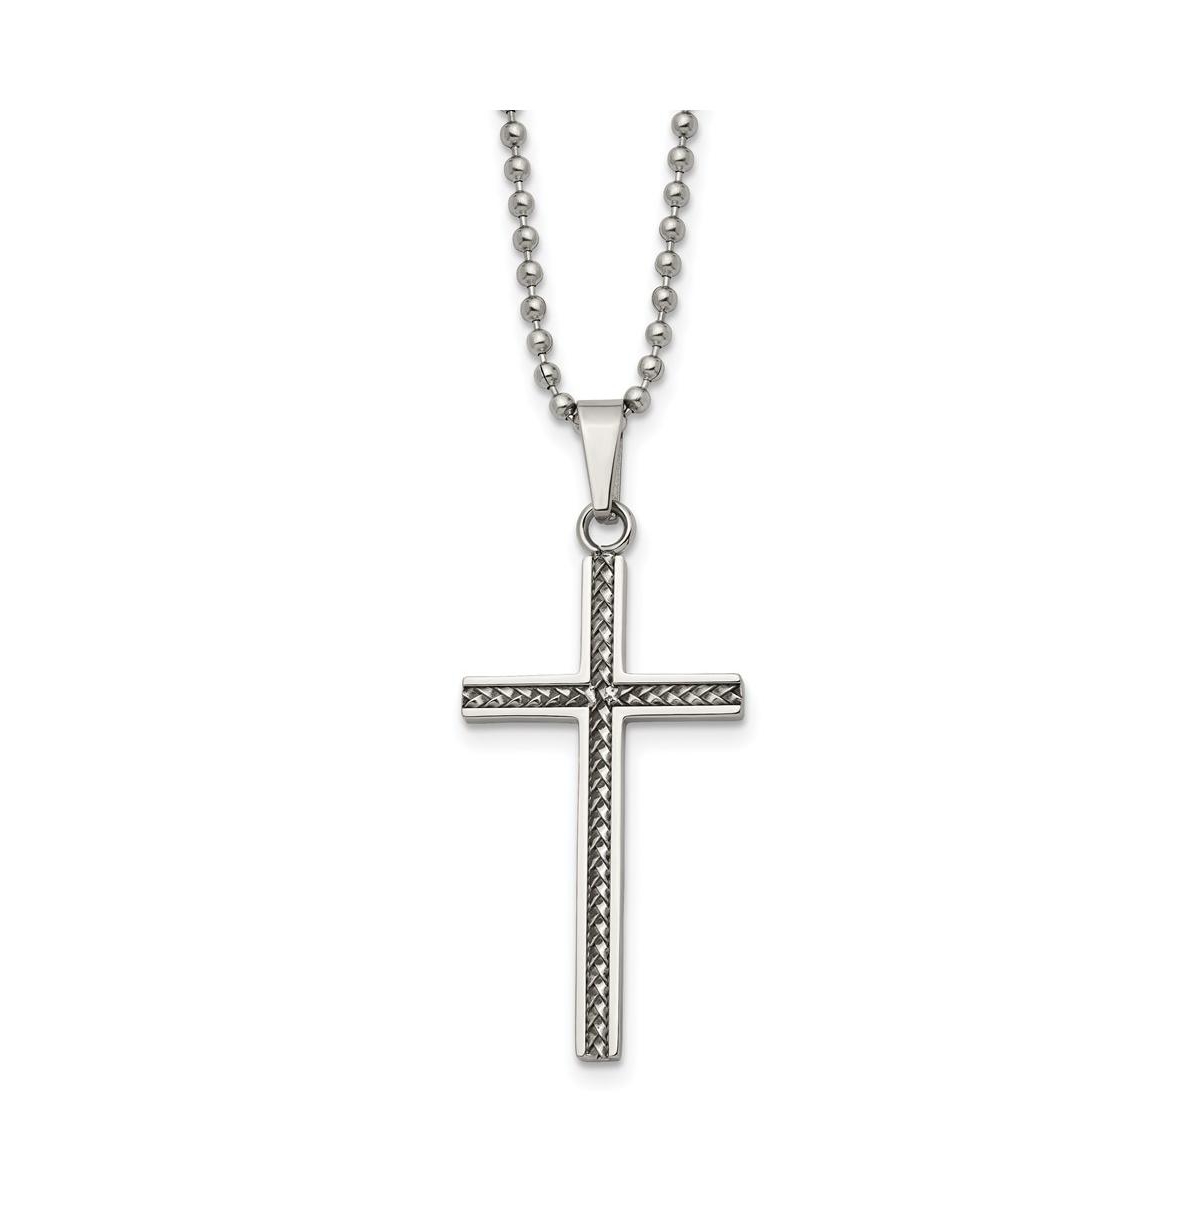 Polished Braided Design Cross Pendant on a Ball Chain Necklace - Silver